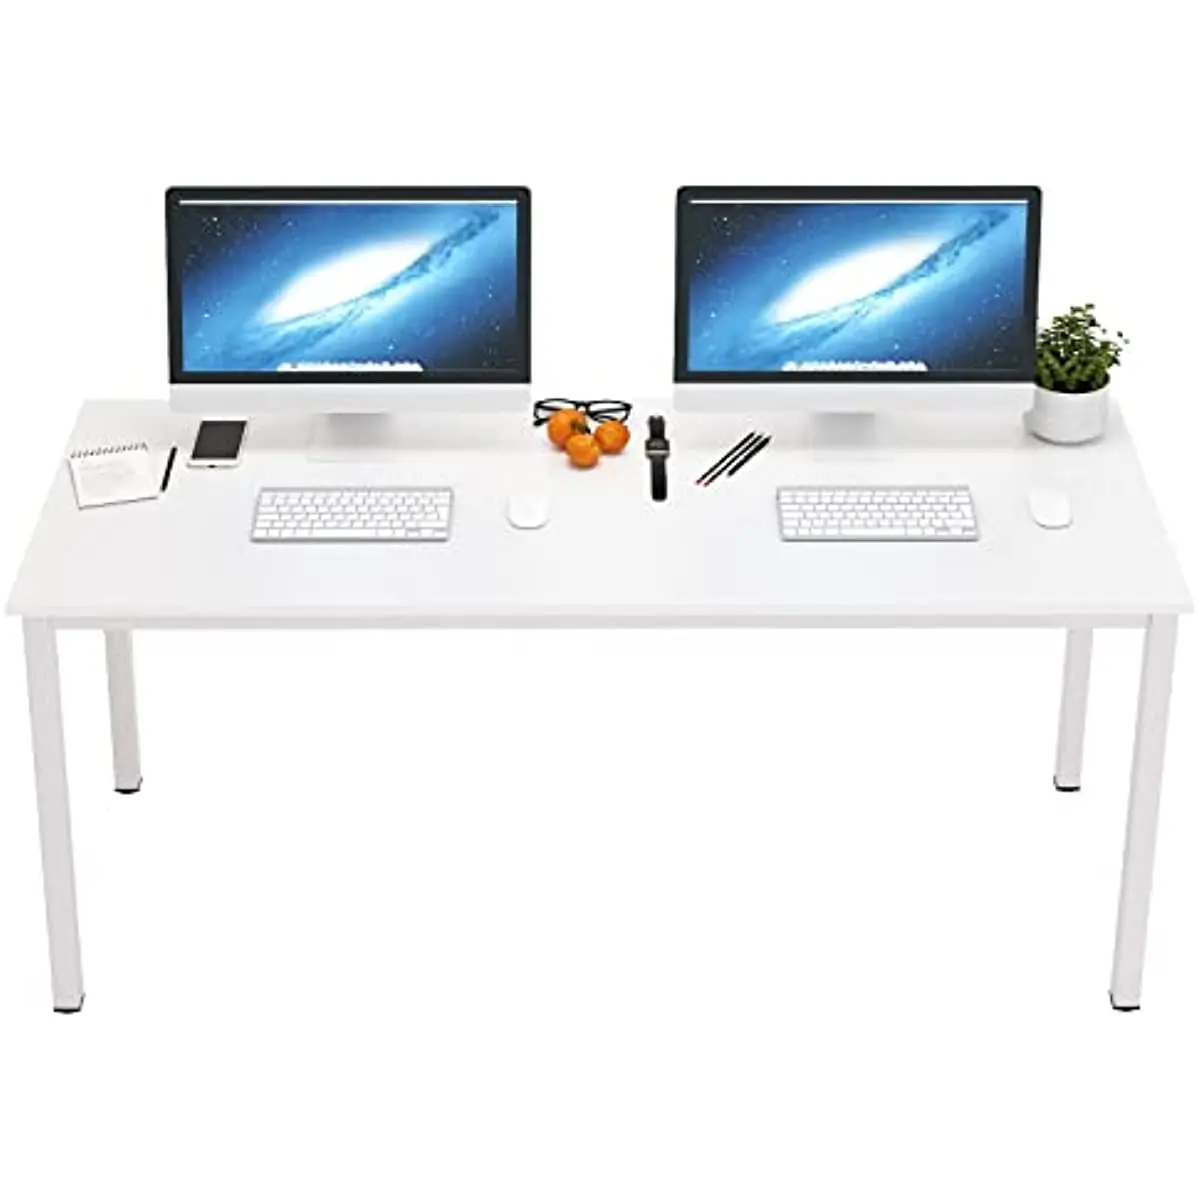 

63 inches X-Large Computer Desk, Composite Wood Board School Desk, Decent and Steady Home Office Desk/Workstation/Table,